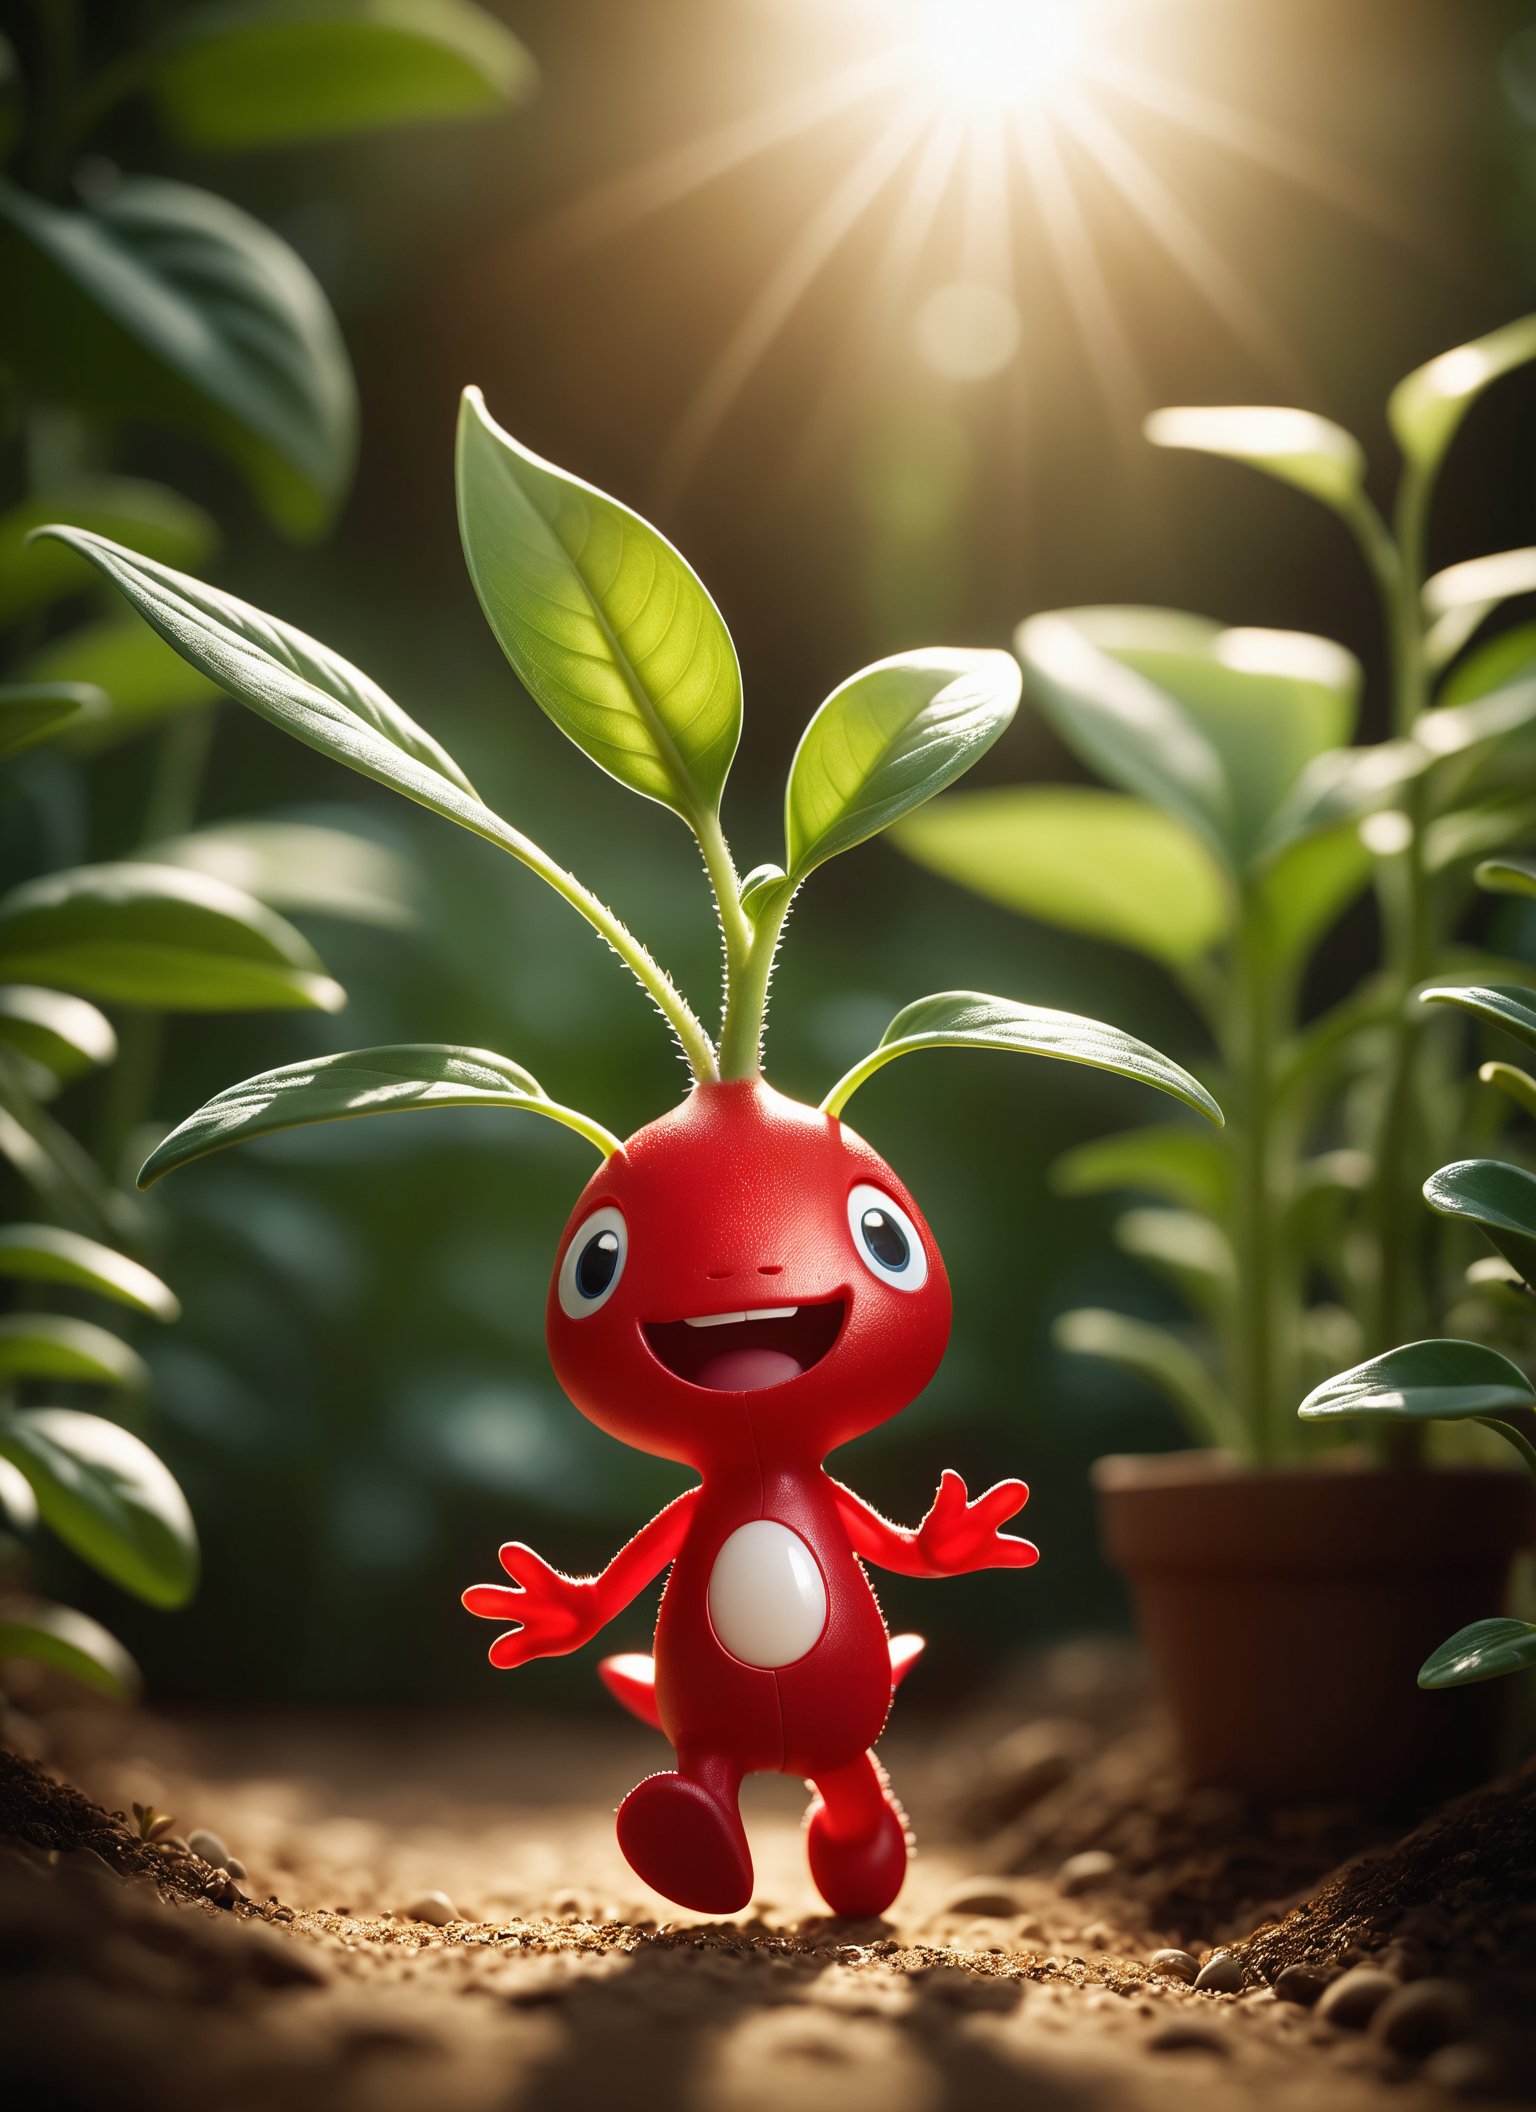 cinematic still realistic (Lovely anthropomorphic baby plant creature:1.2), Cinematic composition, Radiant sunlight, Tiny smiling red pikmin, one tooth, running with arms in the air, National Geographic style, Nature's embrace, Detailed joy, Masterful light and shadow play . emotional, harmonious, vignette, highly detailed, high budget, bokeh, cinemascope, moody, epic, gorgeous, film grain, grainy